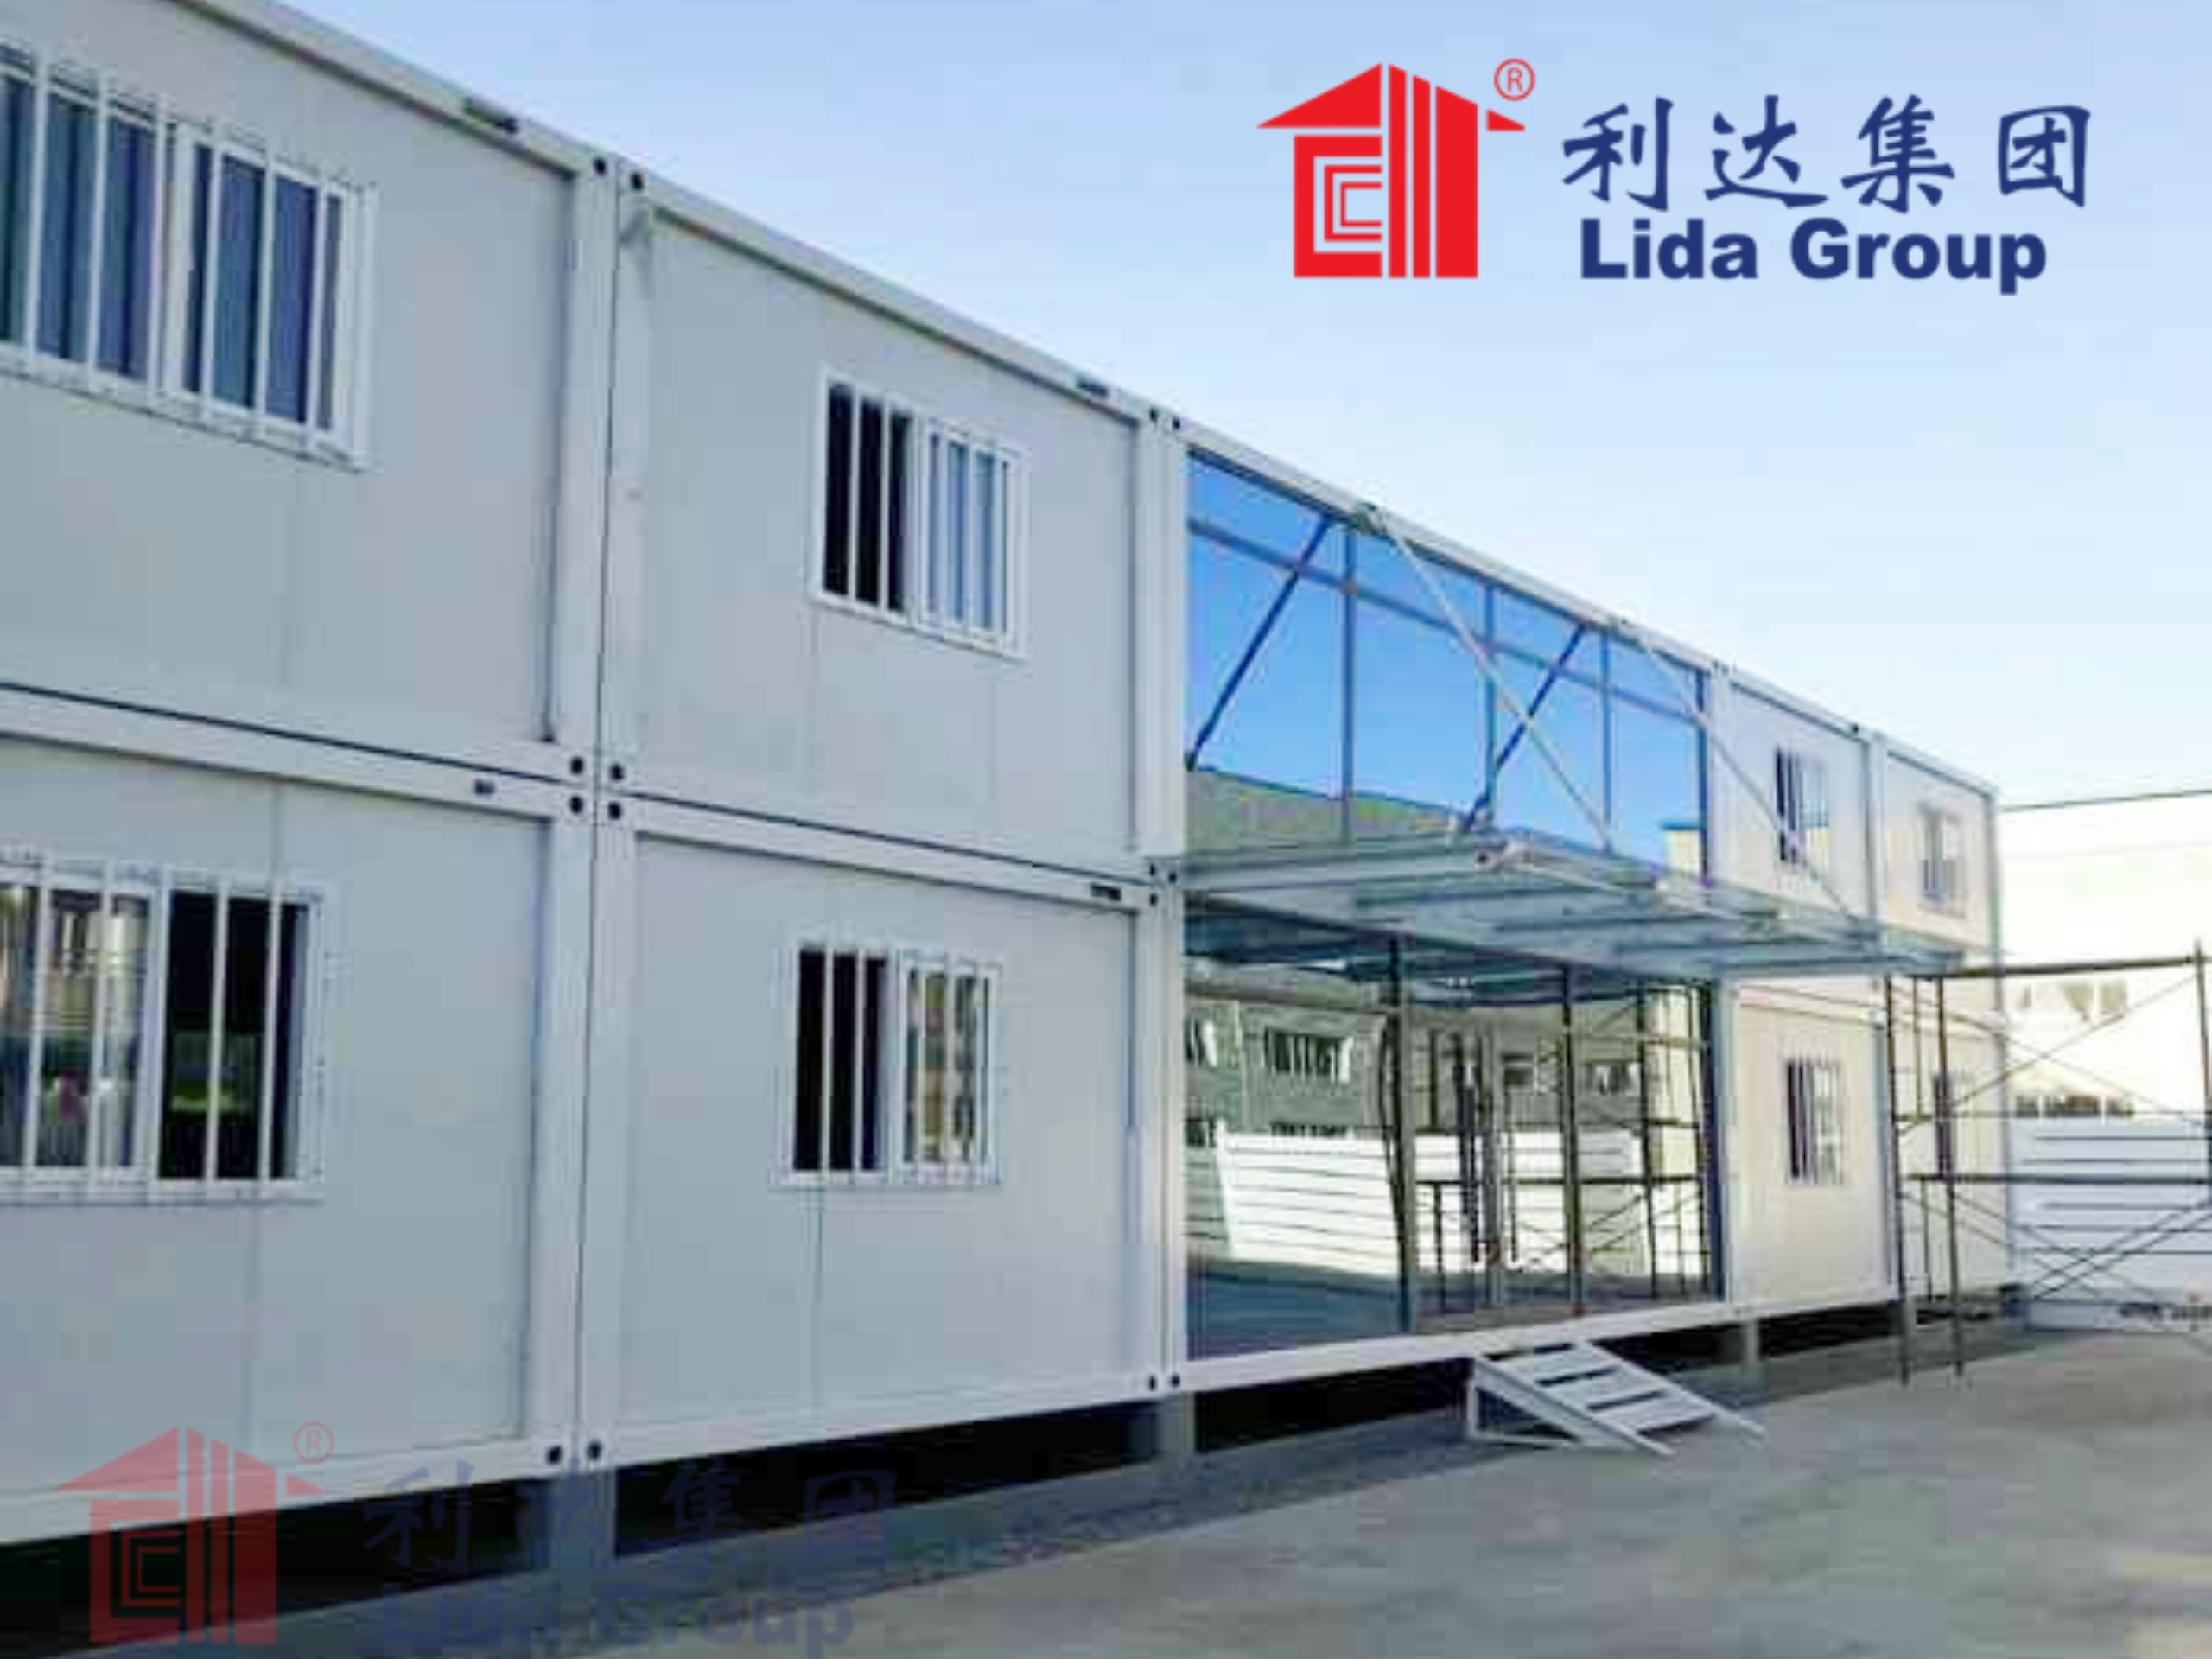 Lida Group envisions scalable business model to install complete self-sufficient labor camps annually serving thousands through refined container house prefabrication.